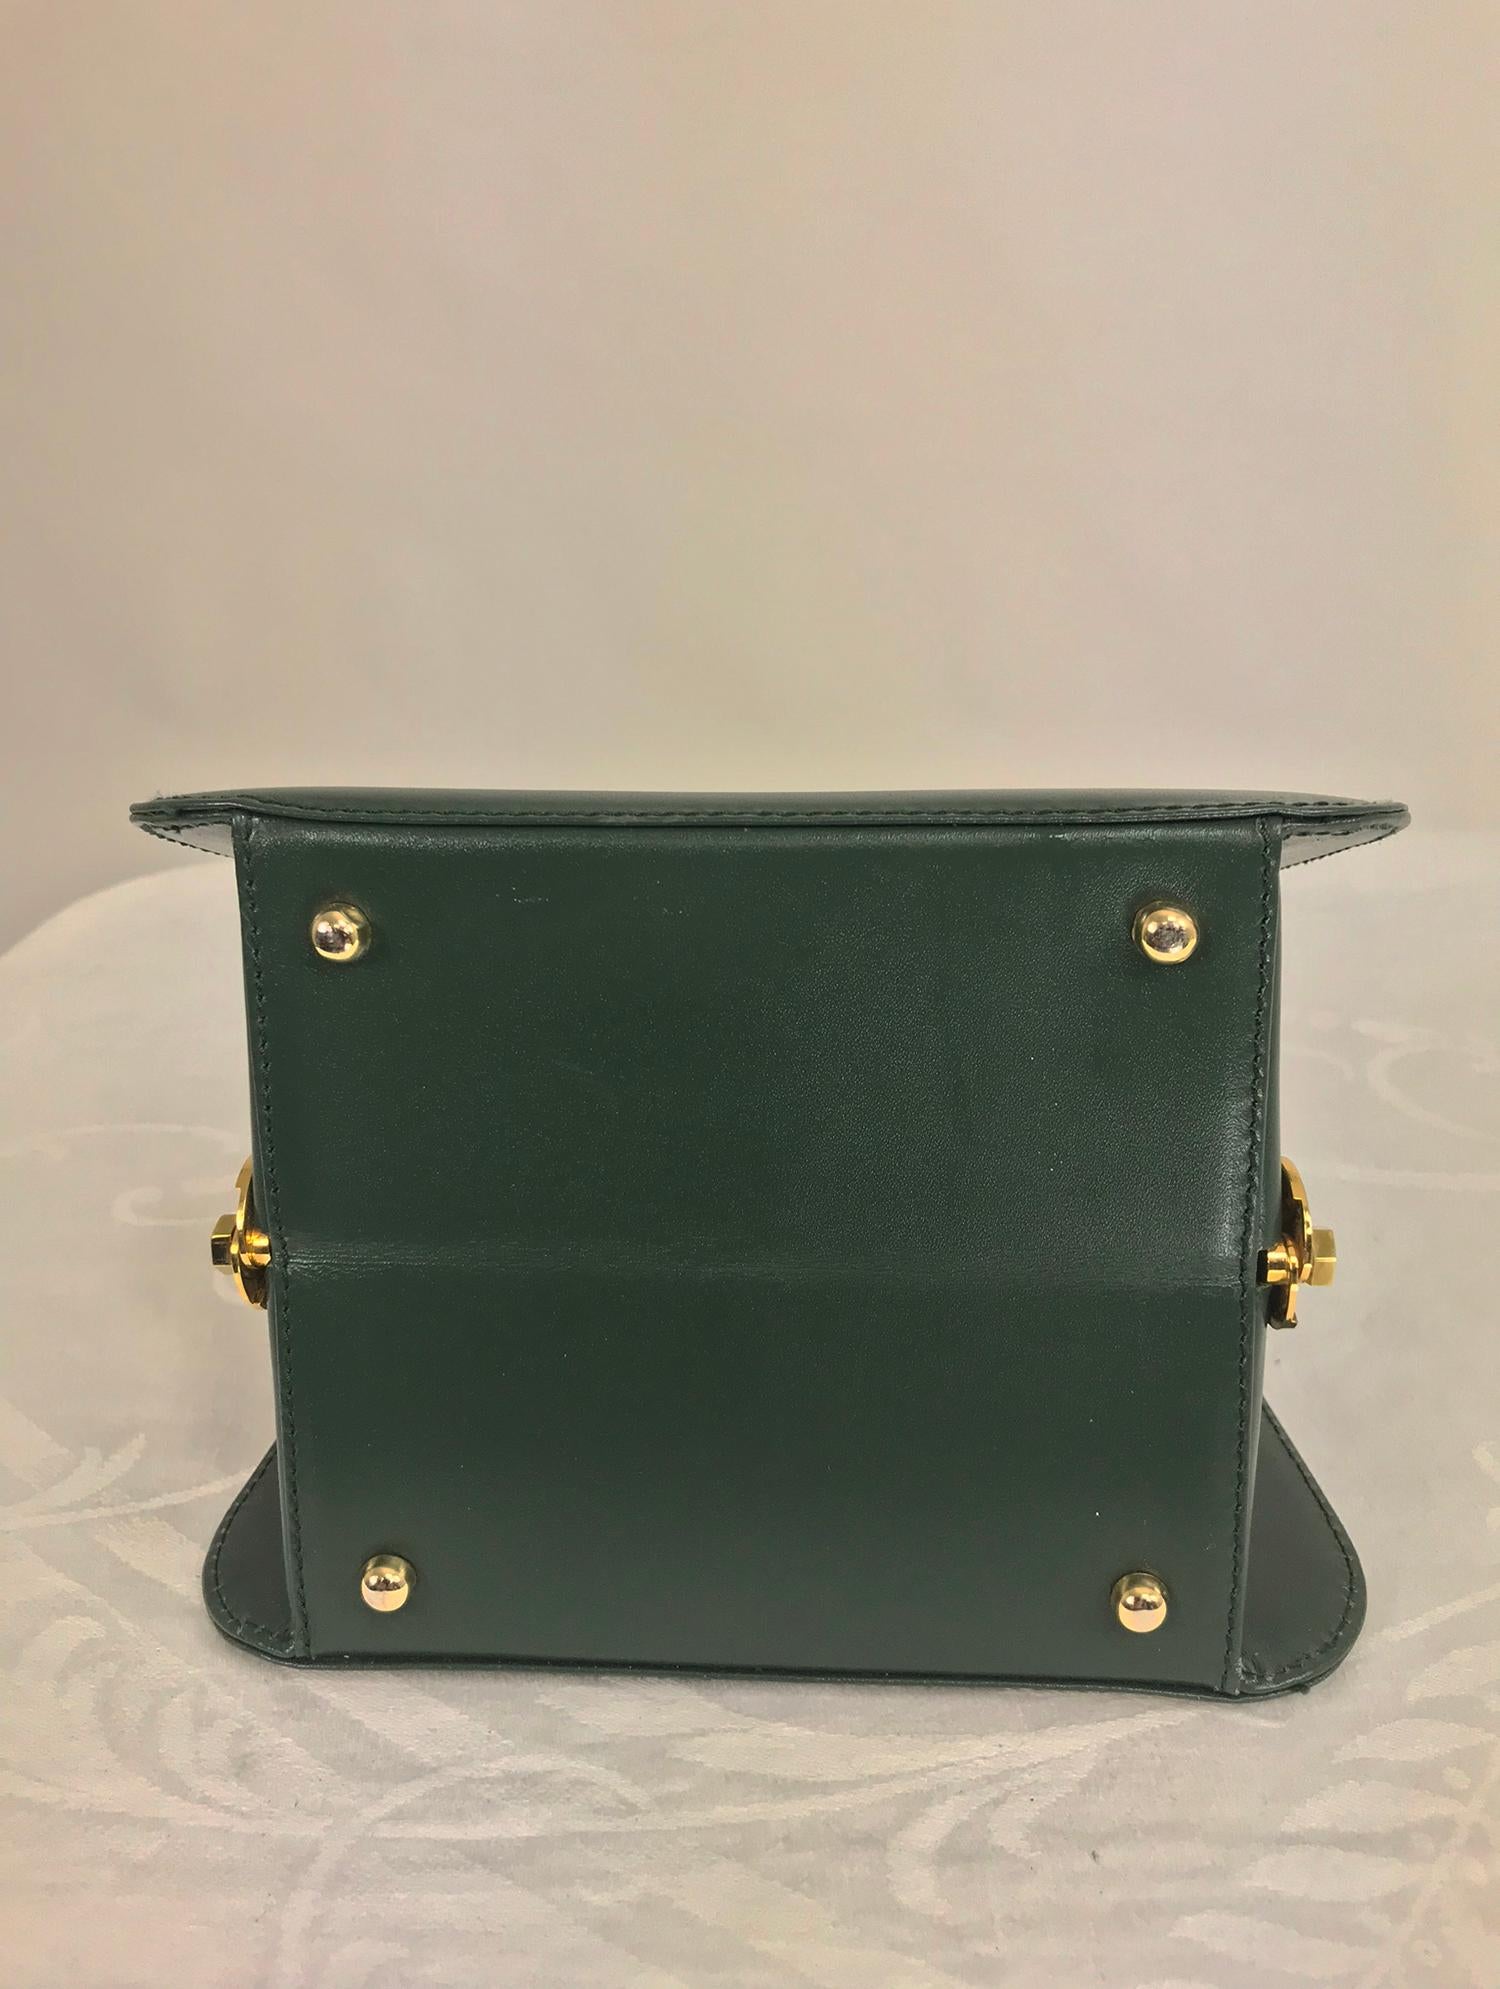 Gianfranco Lotti Firenze Forest Green Leather Handbag In Excellent Condition For Sale In West Palm Beach, FL